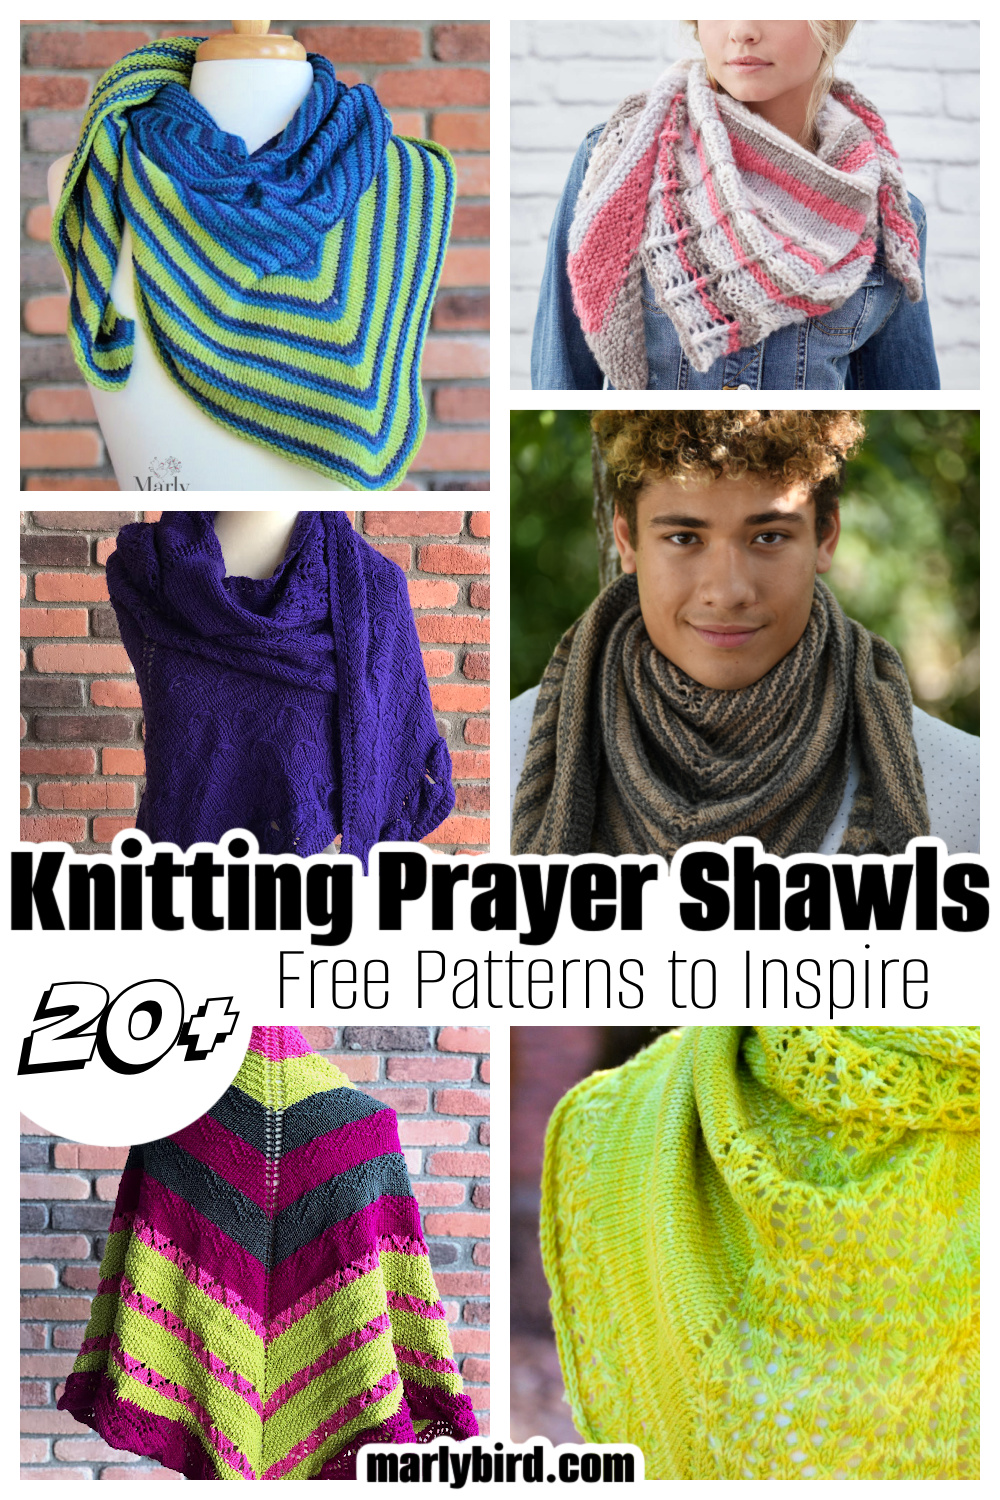 Collage of six images featuring various knit prayer shawls in different patterns and colors displayed on mannequins and worn by a young man, with text "20+ knitting prayer shawls free patterns to inspire" overlaid. -Marly Bird